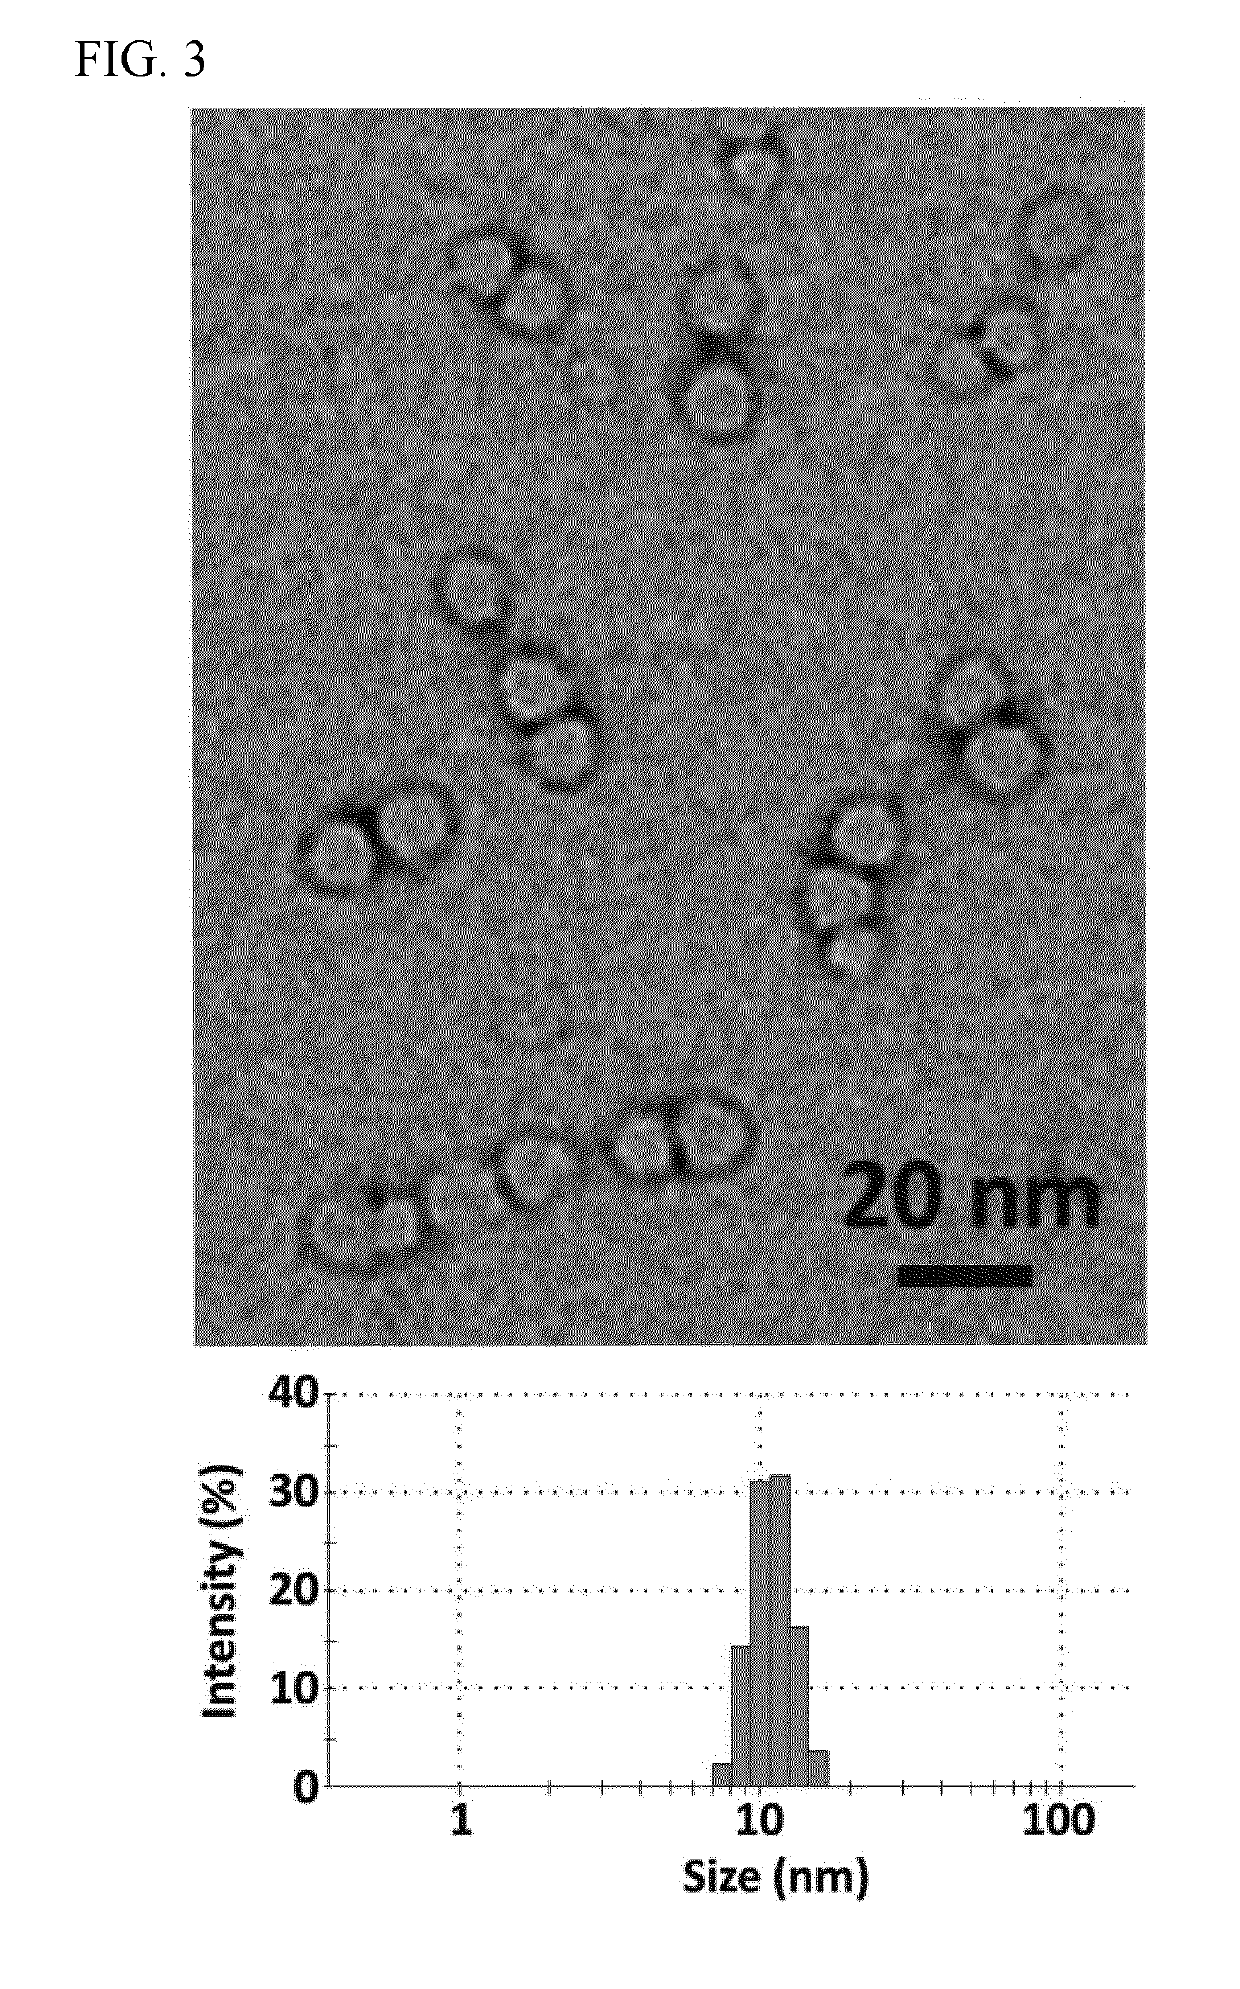 Nanocapsule delivery system for ribonucleoproteins